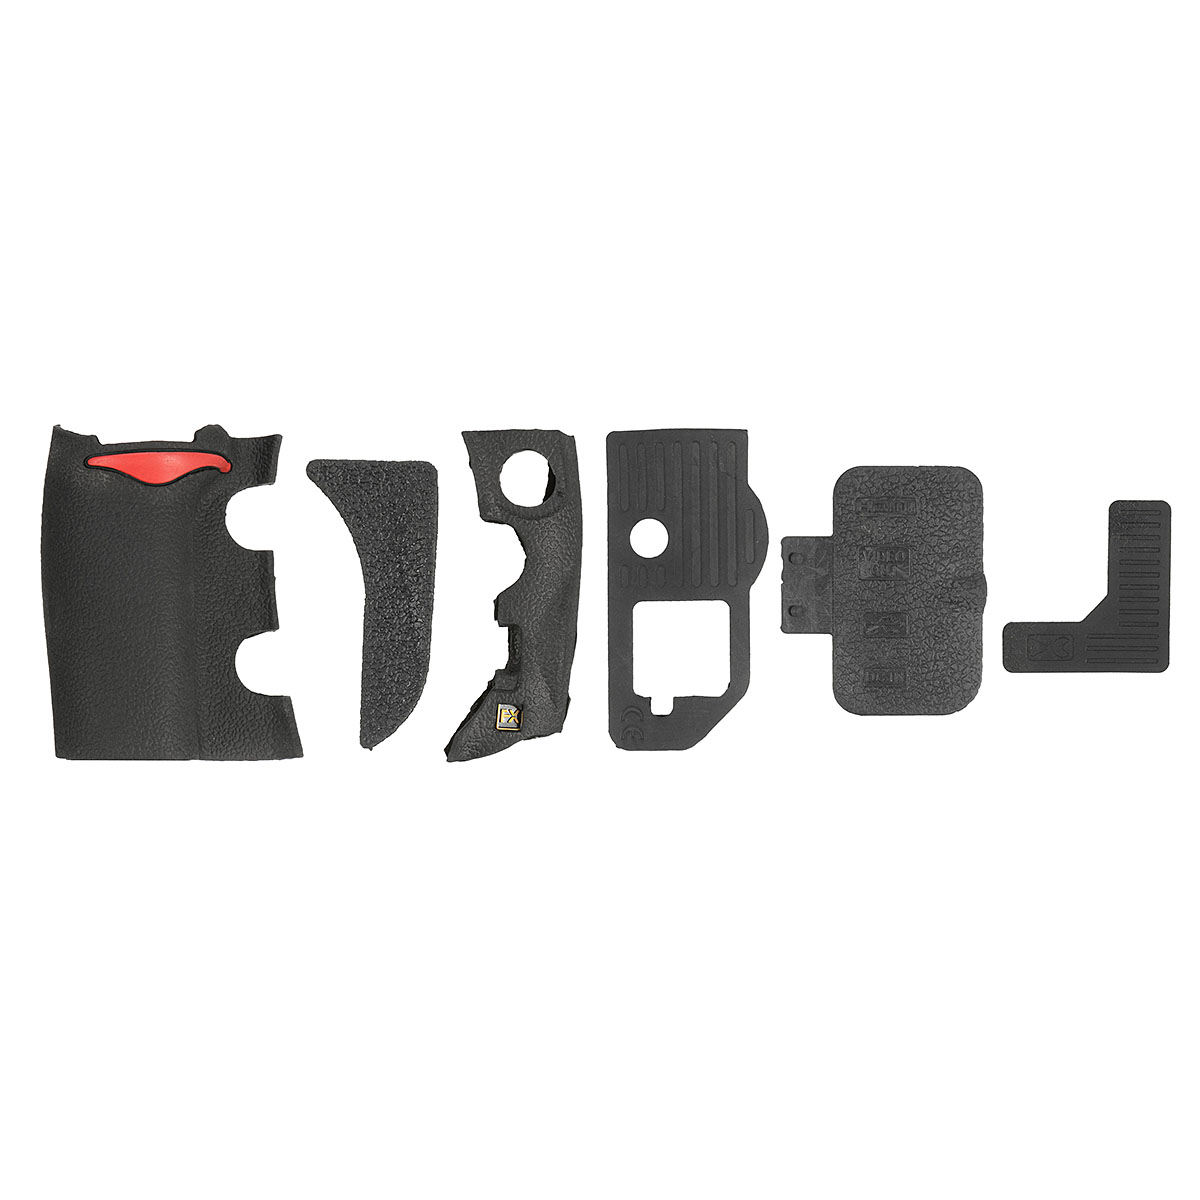 

6 Pieces Grip USB Rubber Unit Repair Cover Part and Adhesive Tape For Nikon D700